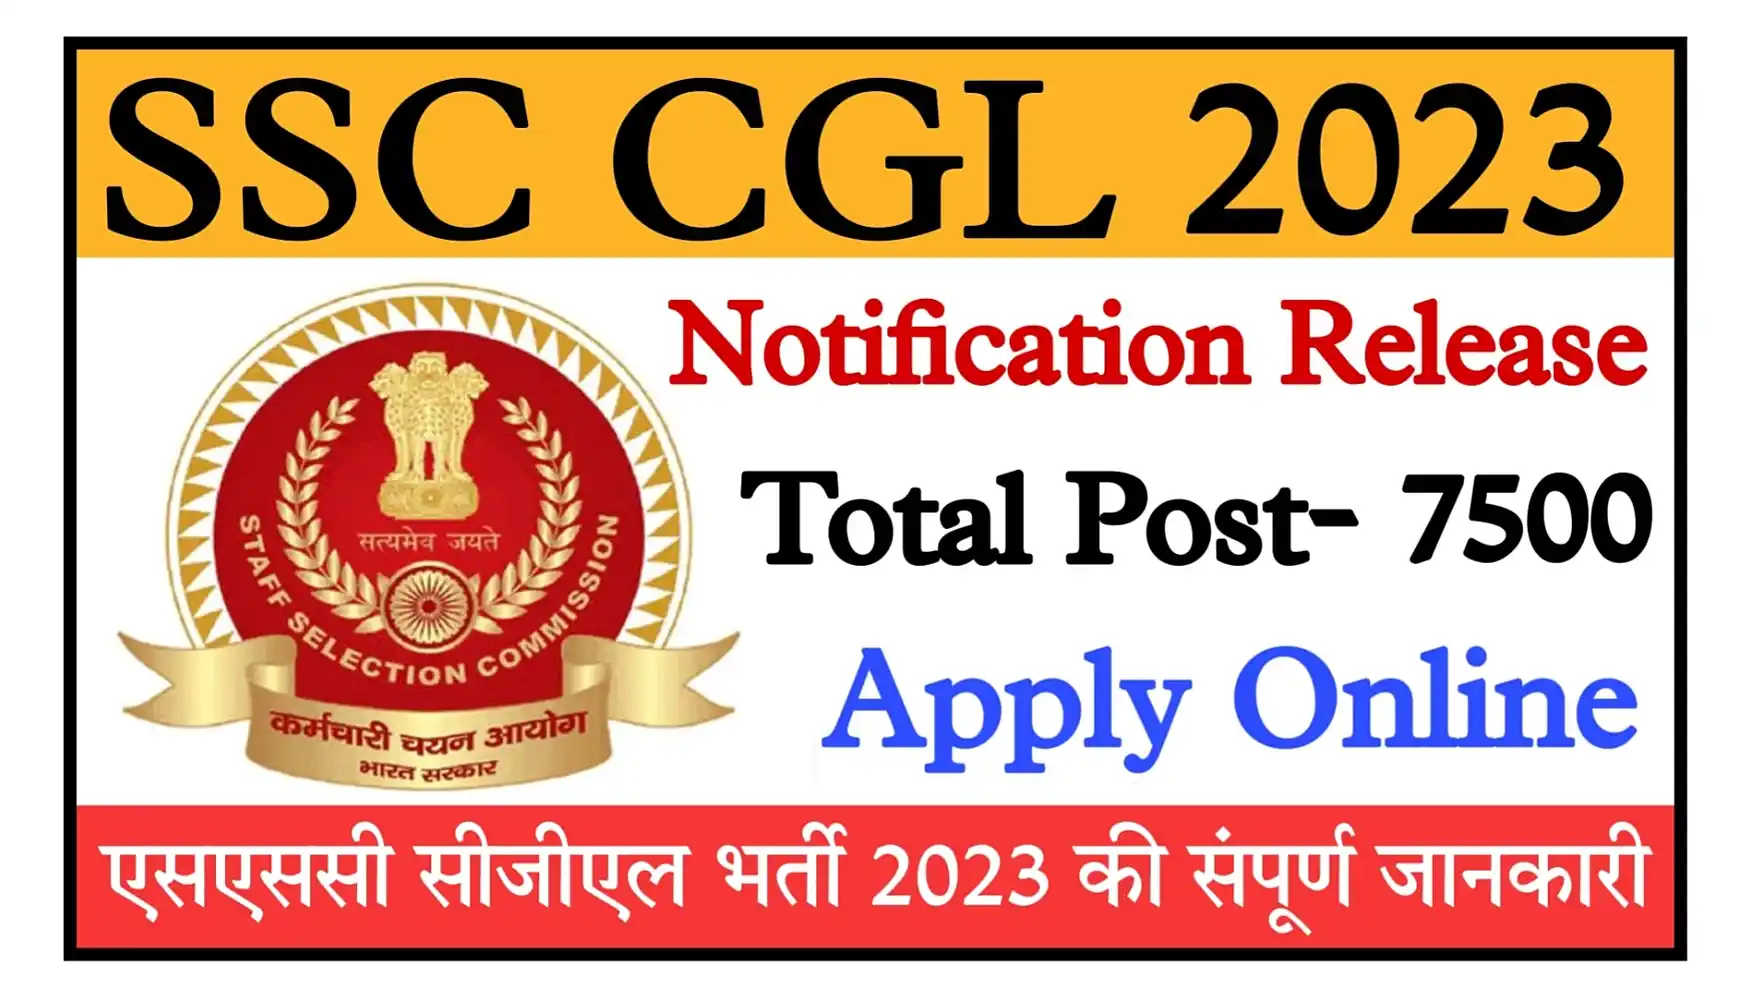 SSC CGL 2023 Notification, Apply Online For 7500 Posts Check All Information